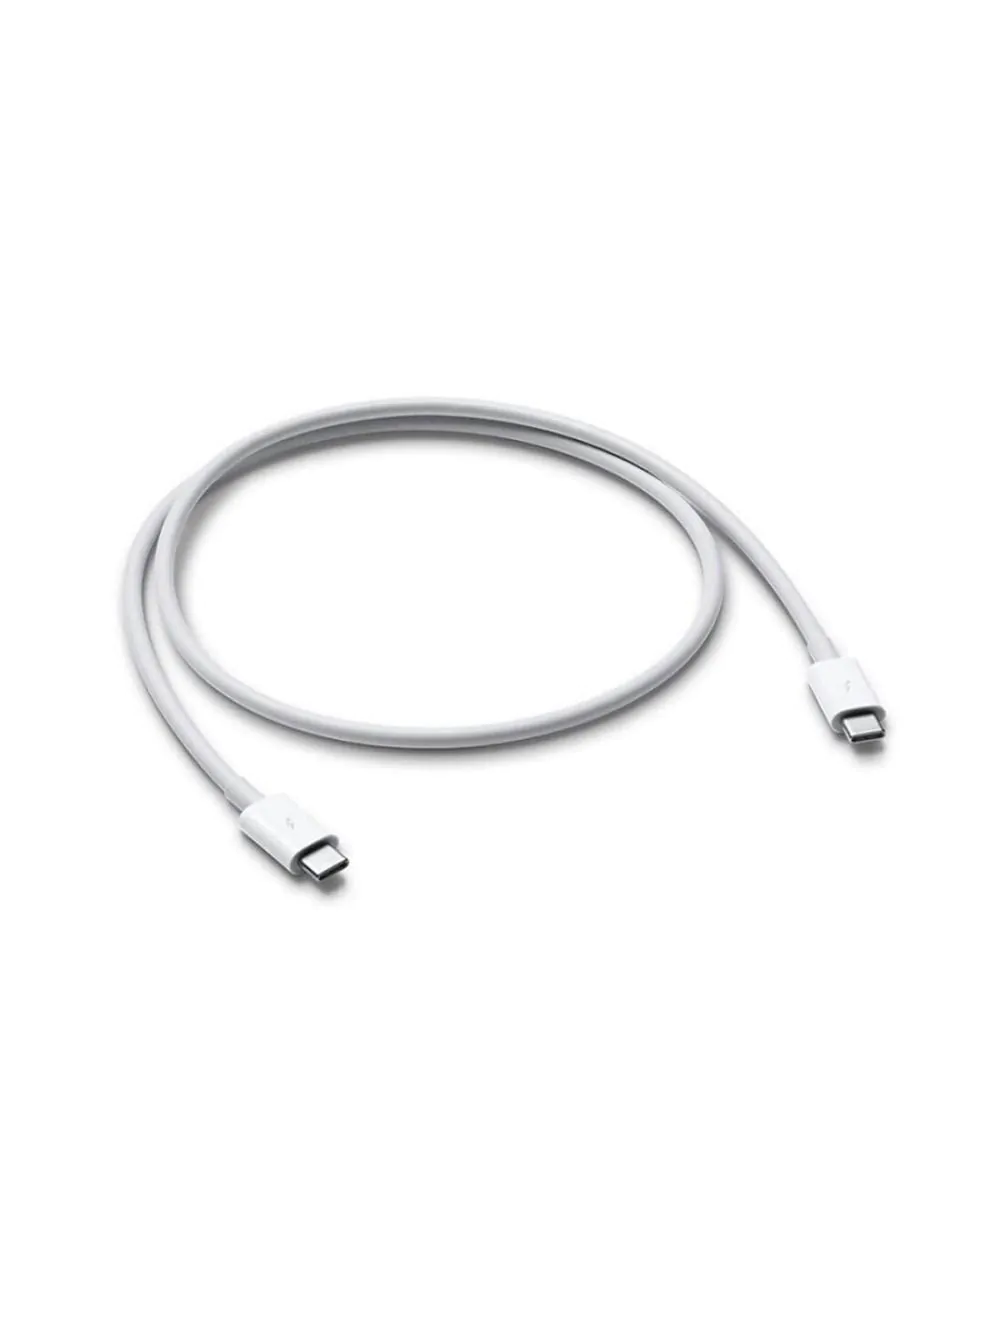 LMP Magnetic Safety charging cable - LMP